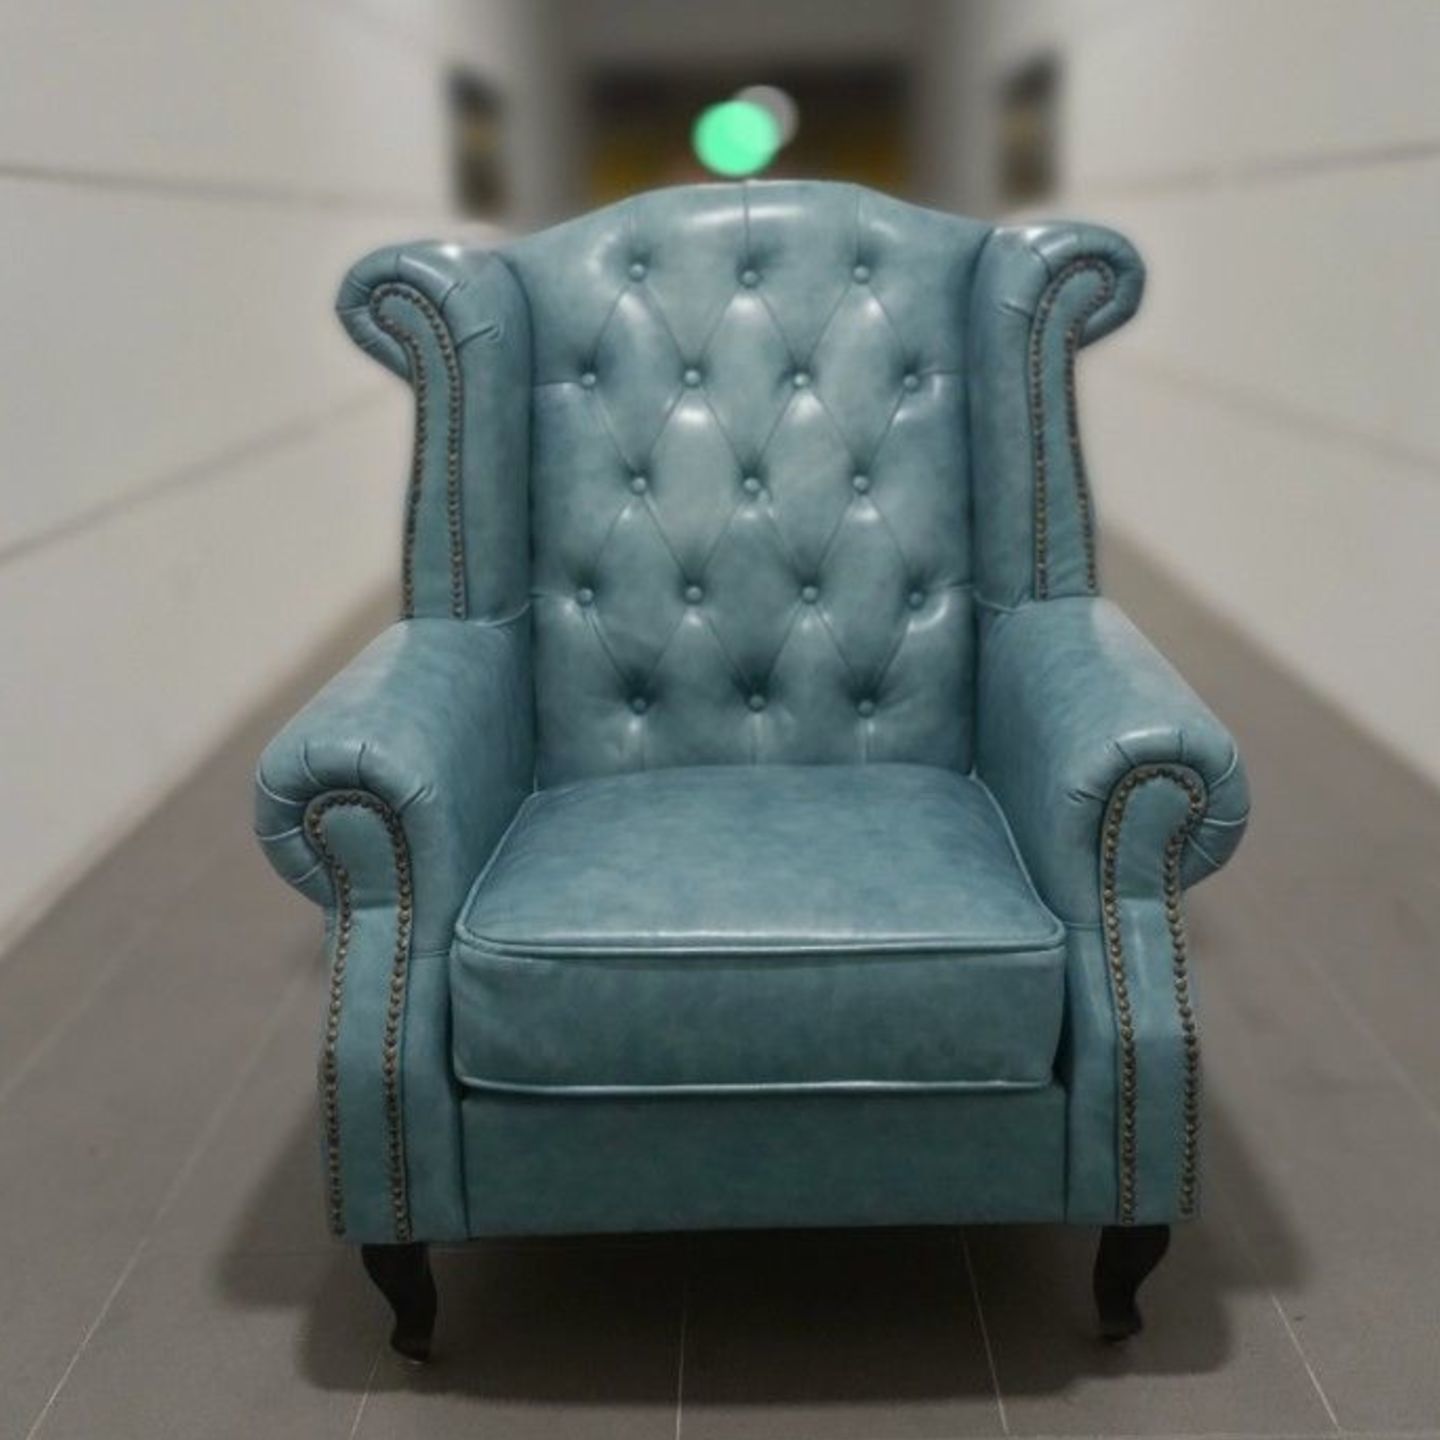 FIRE SALE PROMO - CONVA Chesterfield Tiger Armchair in SKY BLUE GENUINE LEATHER